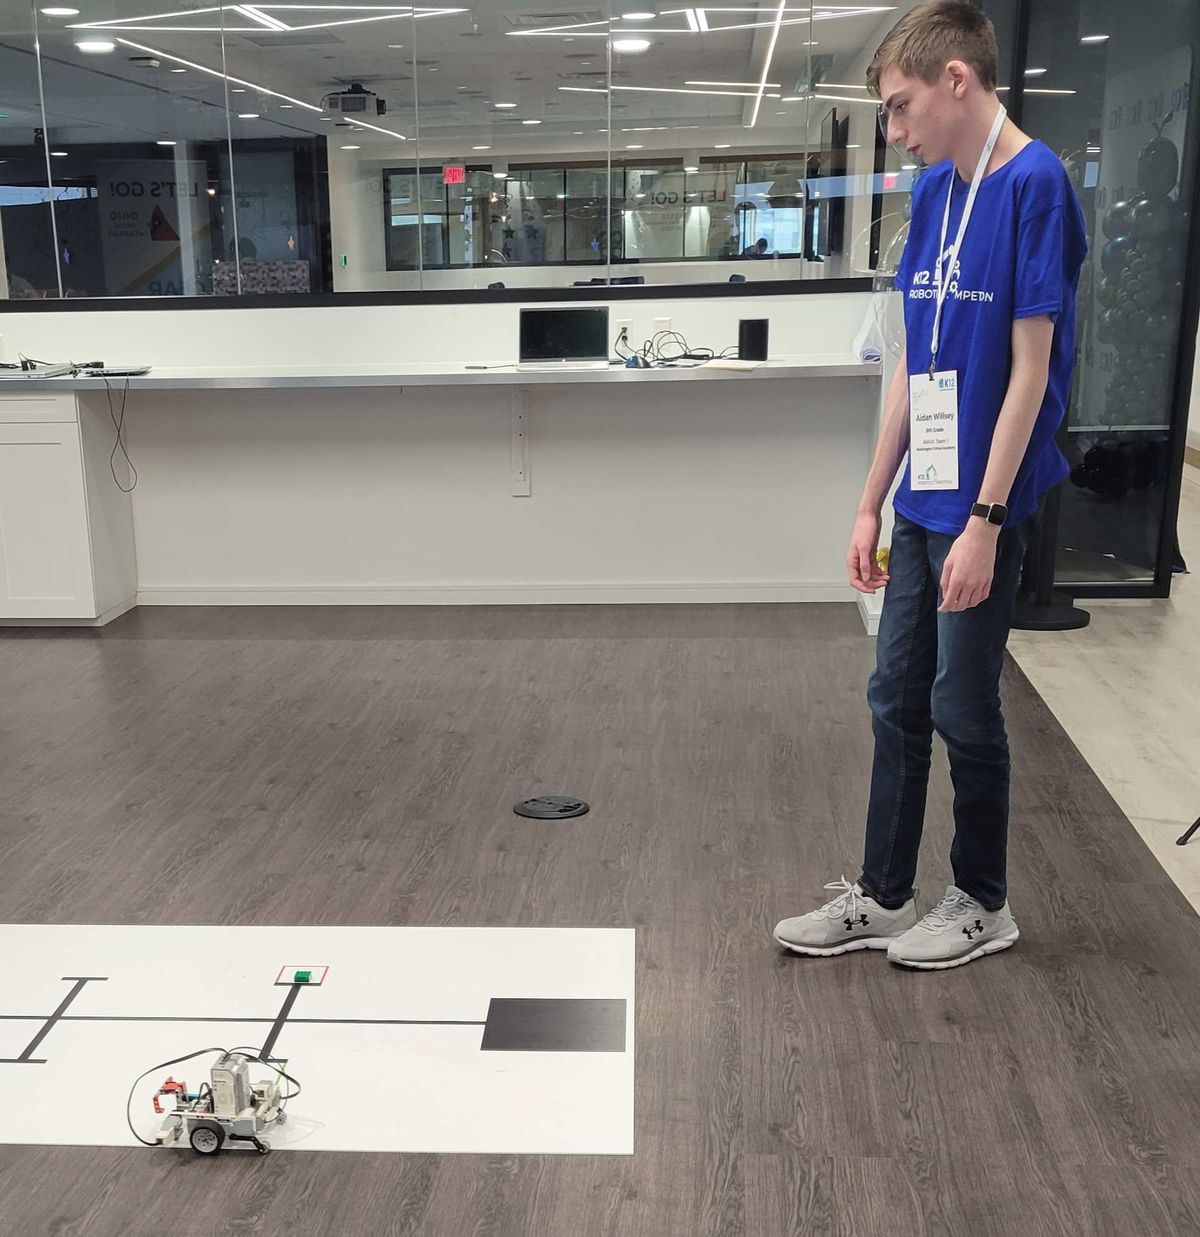 Aidan Willsey went to Washington, D.C. for a robotics competition, where he and his partner placed second.  (Courtesy)